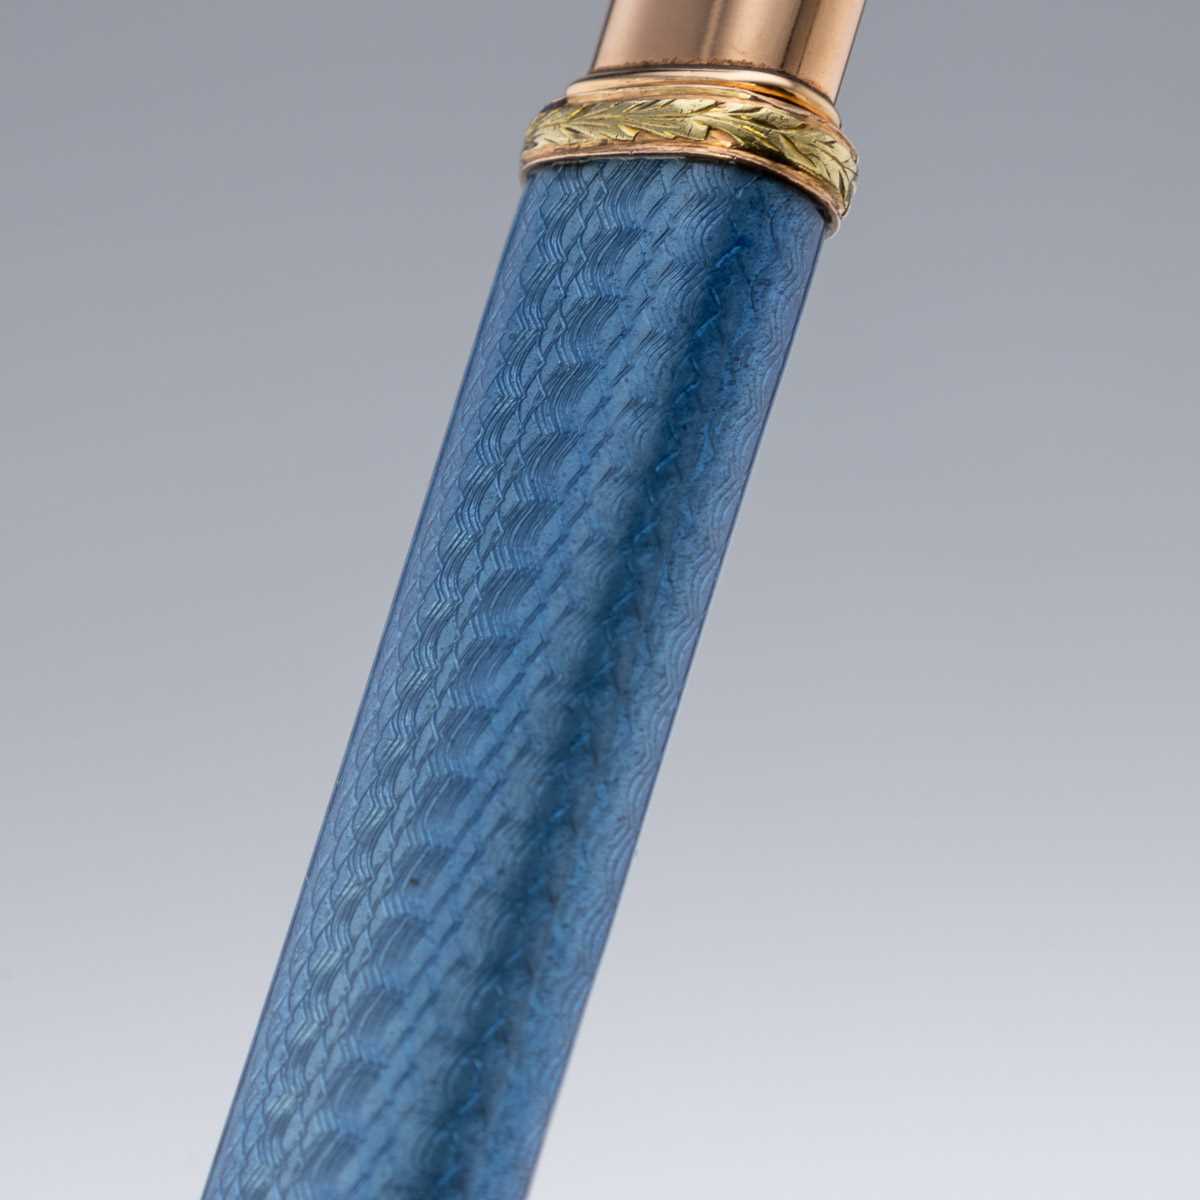 FABERGE: AN EARLY 20TH CENTURY GOLD AND ENAMEL PENCIL, MAKER'S MARK A.A. - Image 3 of 9